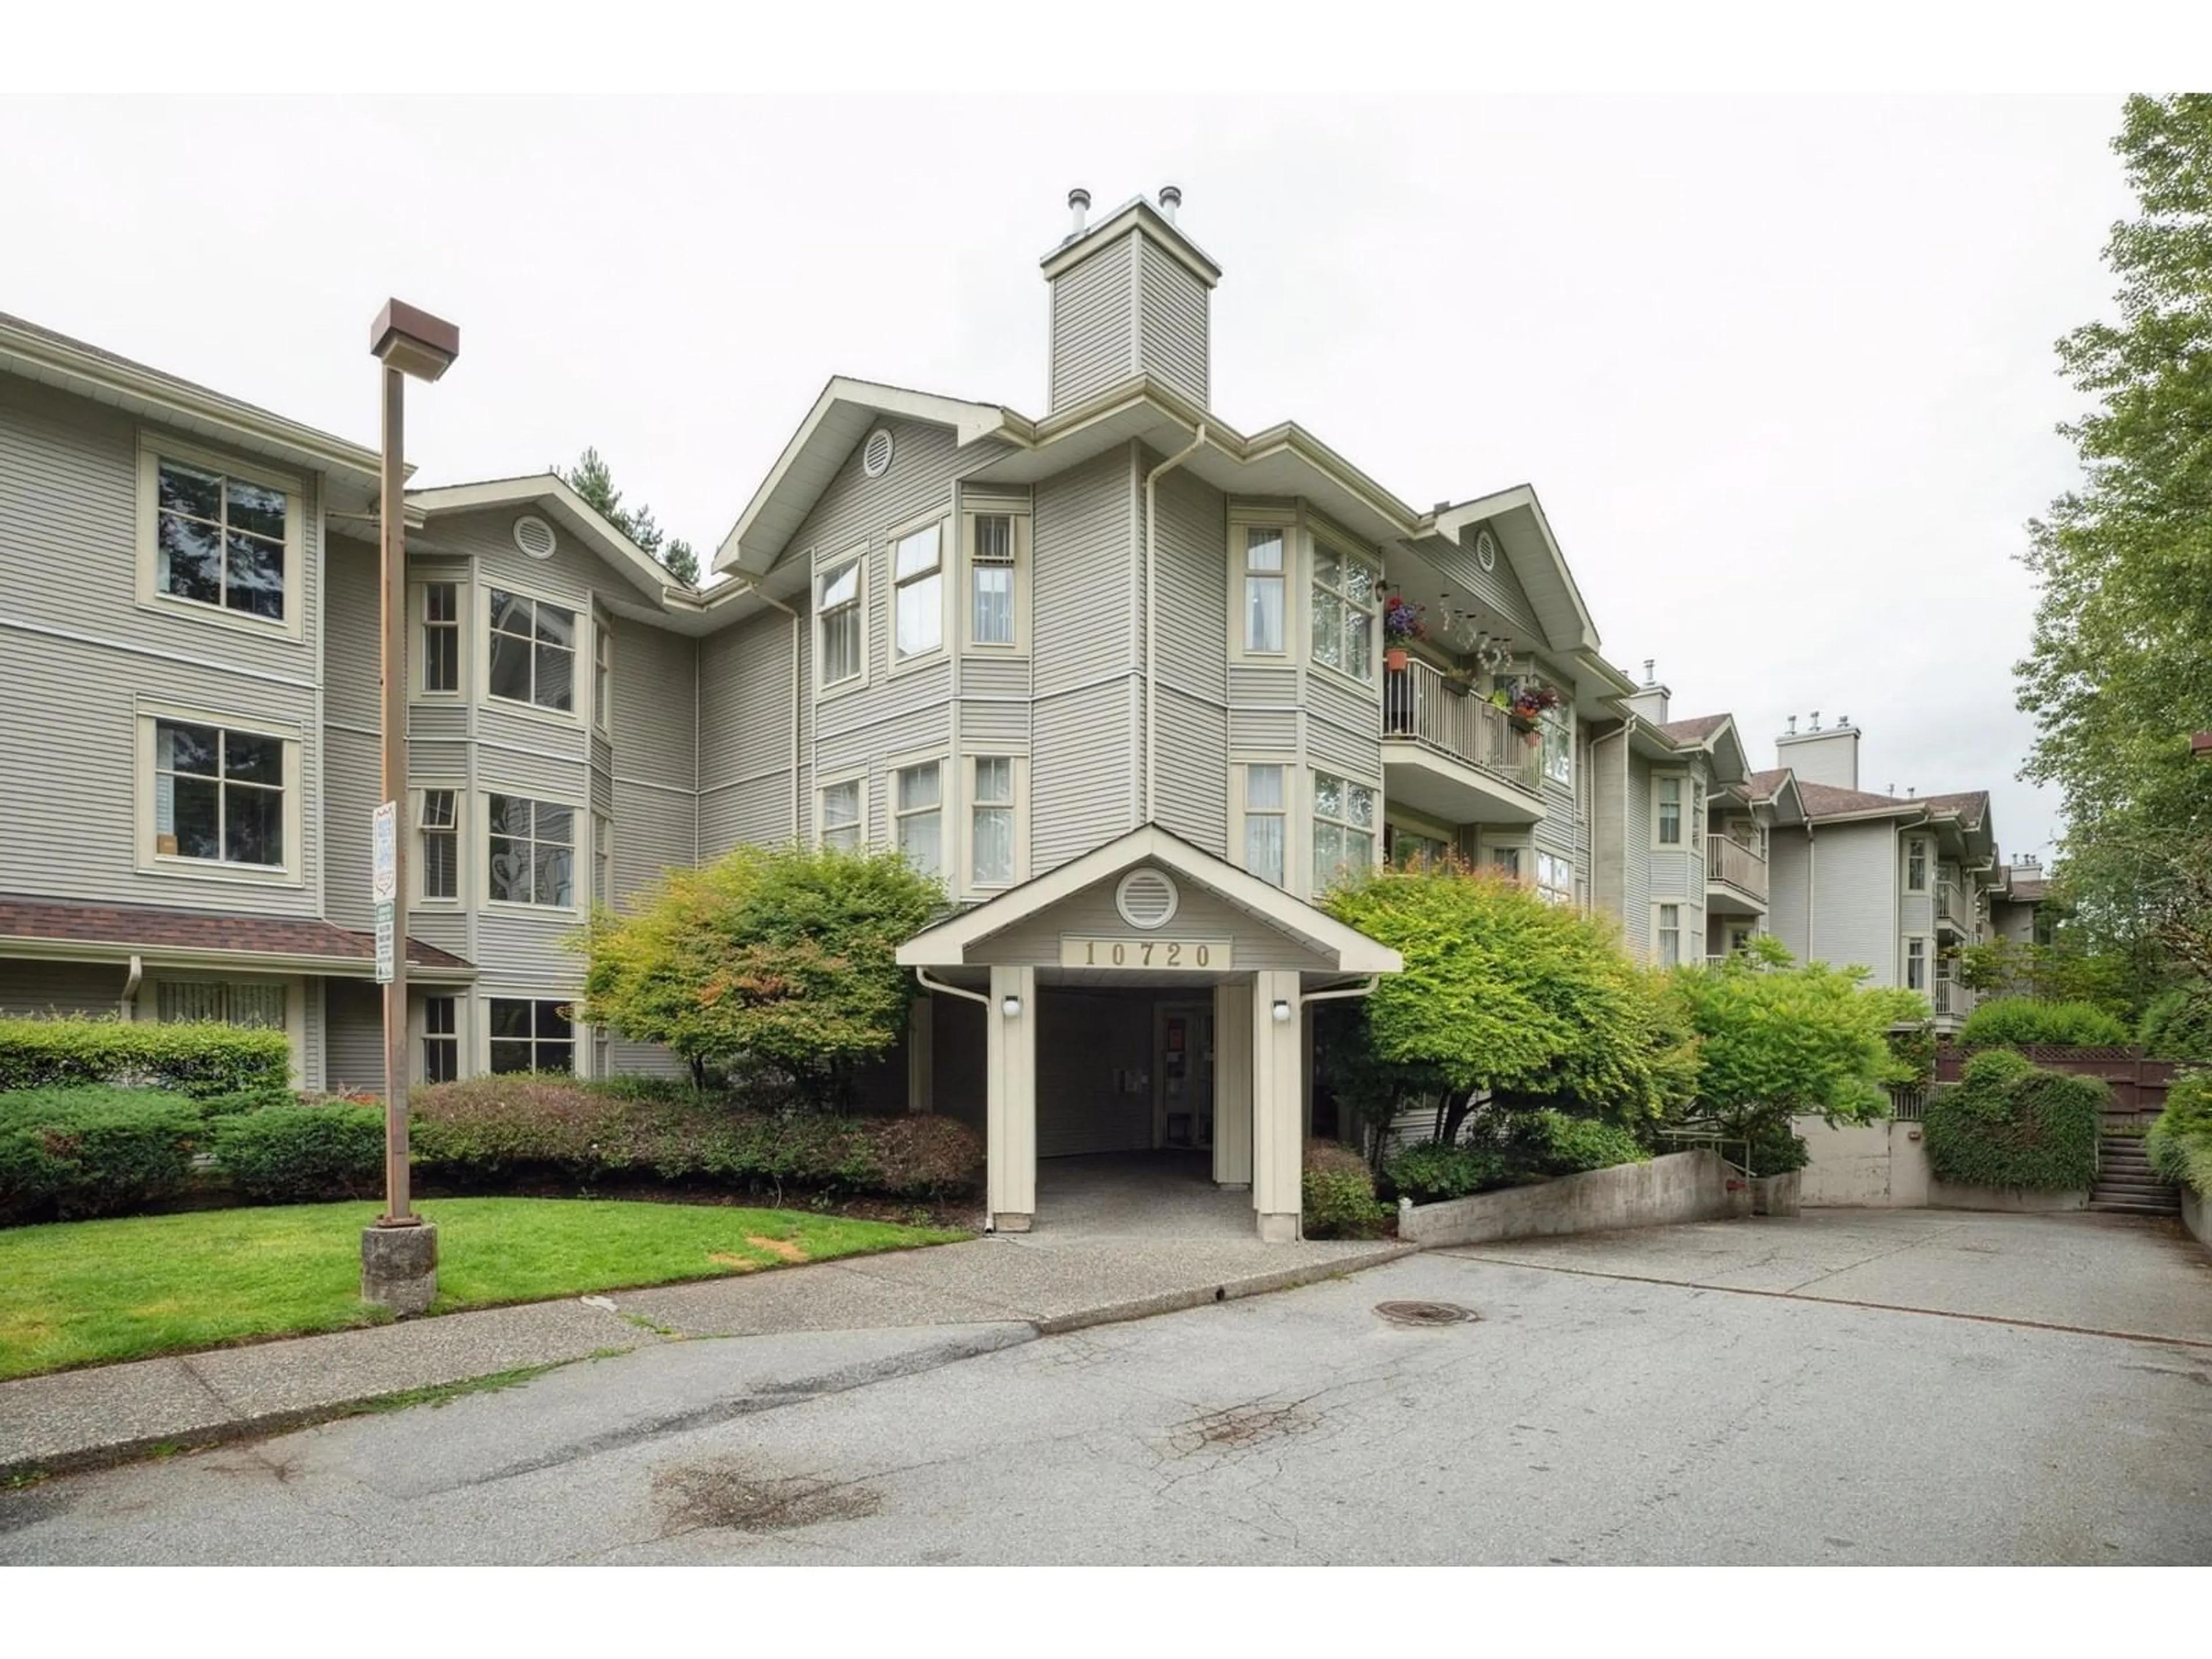 A pic from exterior of the house or condo for 309 10720 138 STREET, Surrey British Columbia V3T4K5